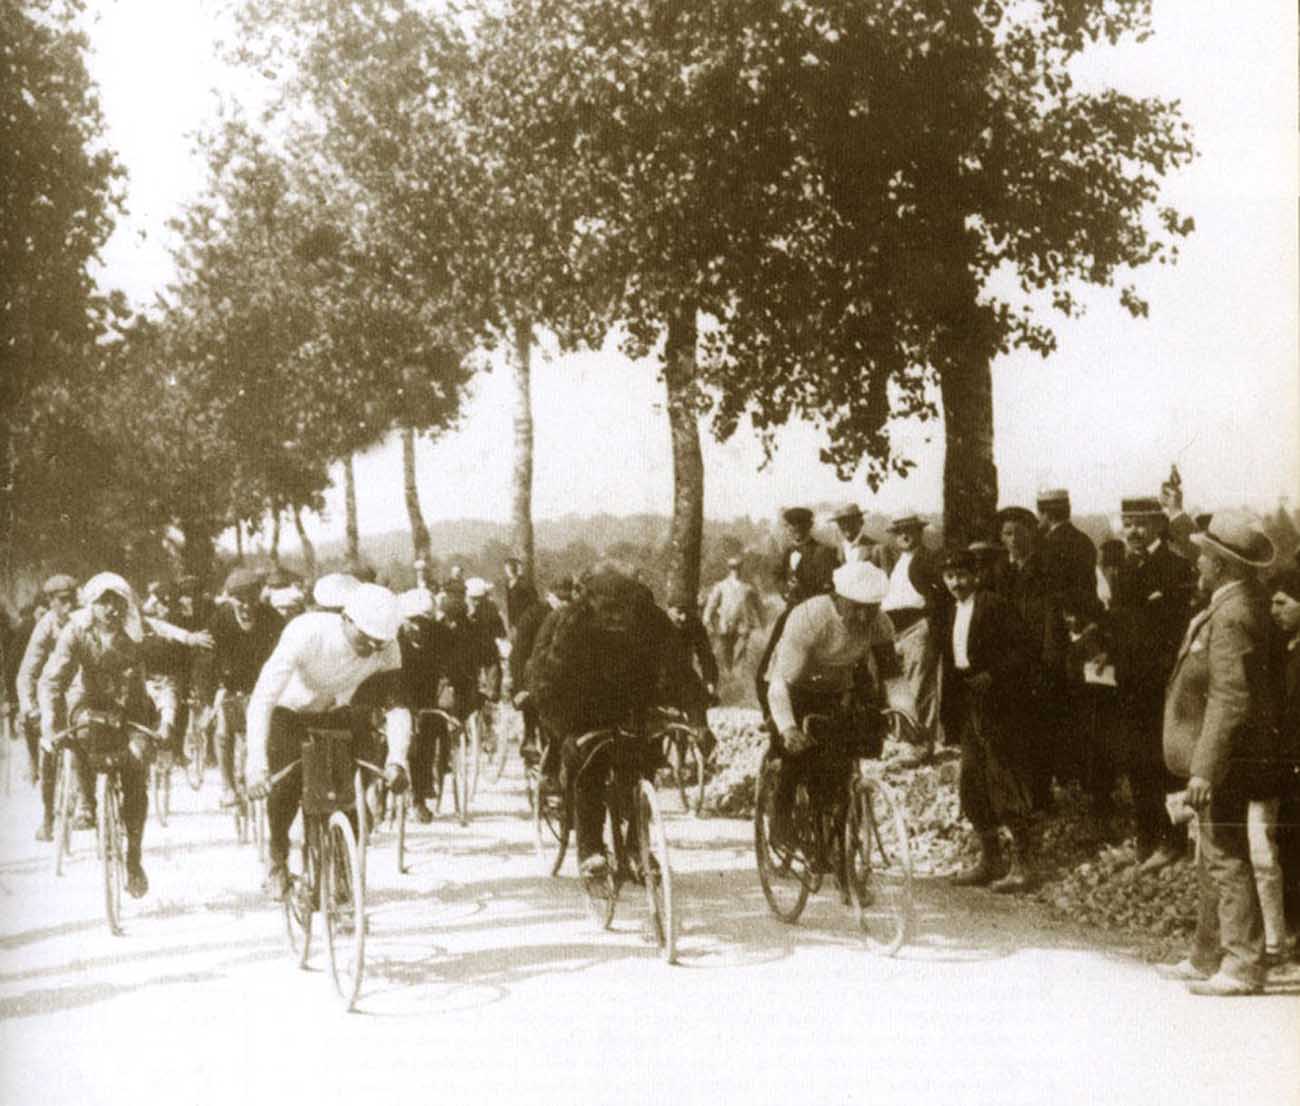 The first kilometer in the history of the Tour de France.